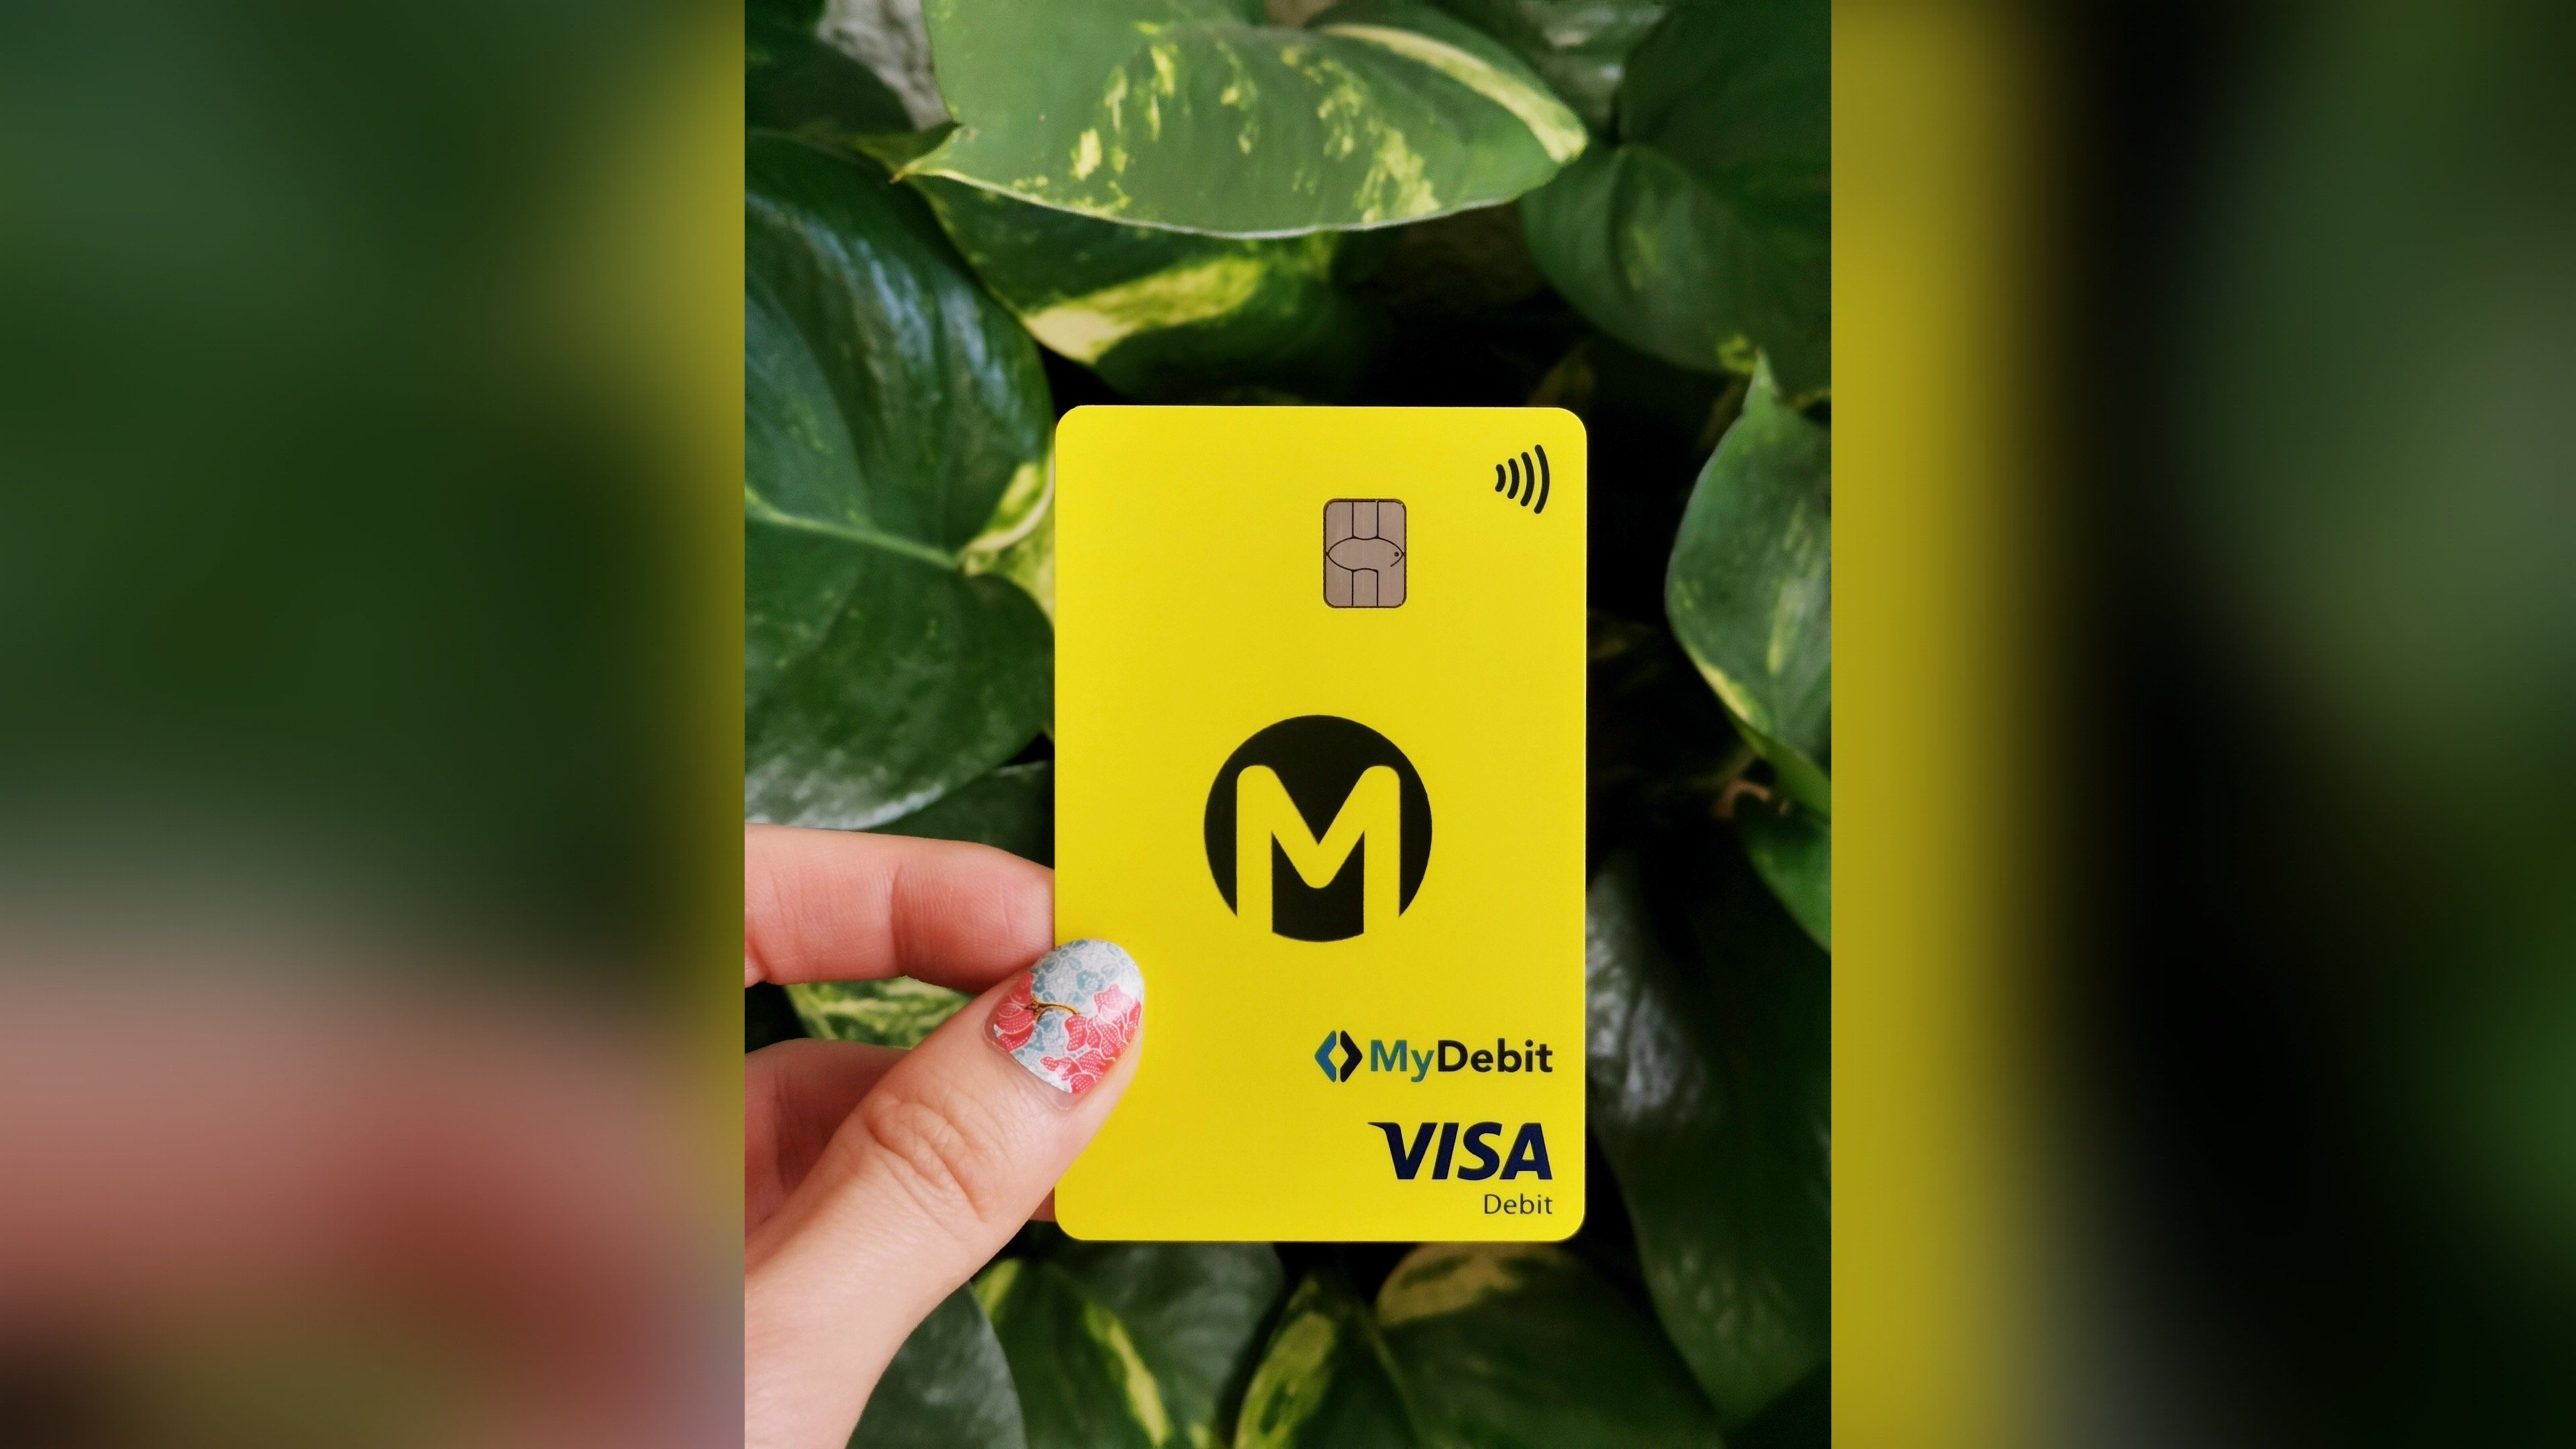 Maybank Releases MAE Card, A Debit Card For The MAE Wallet